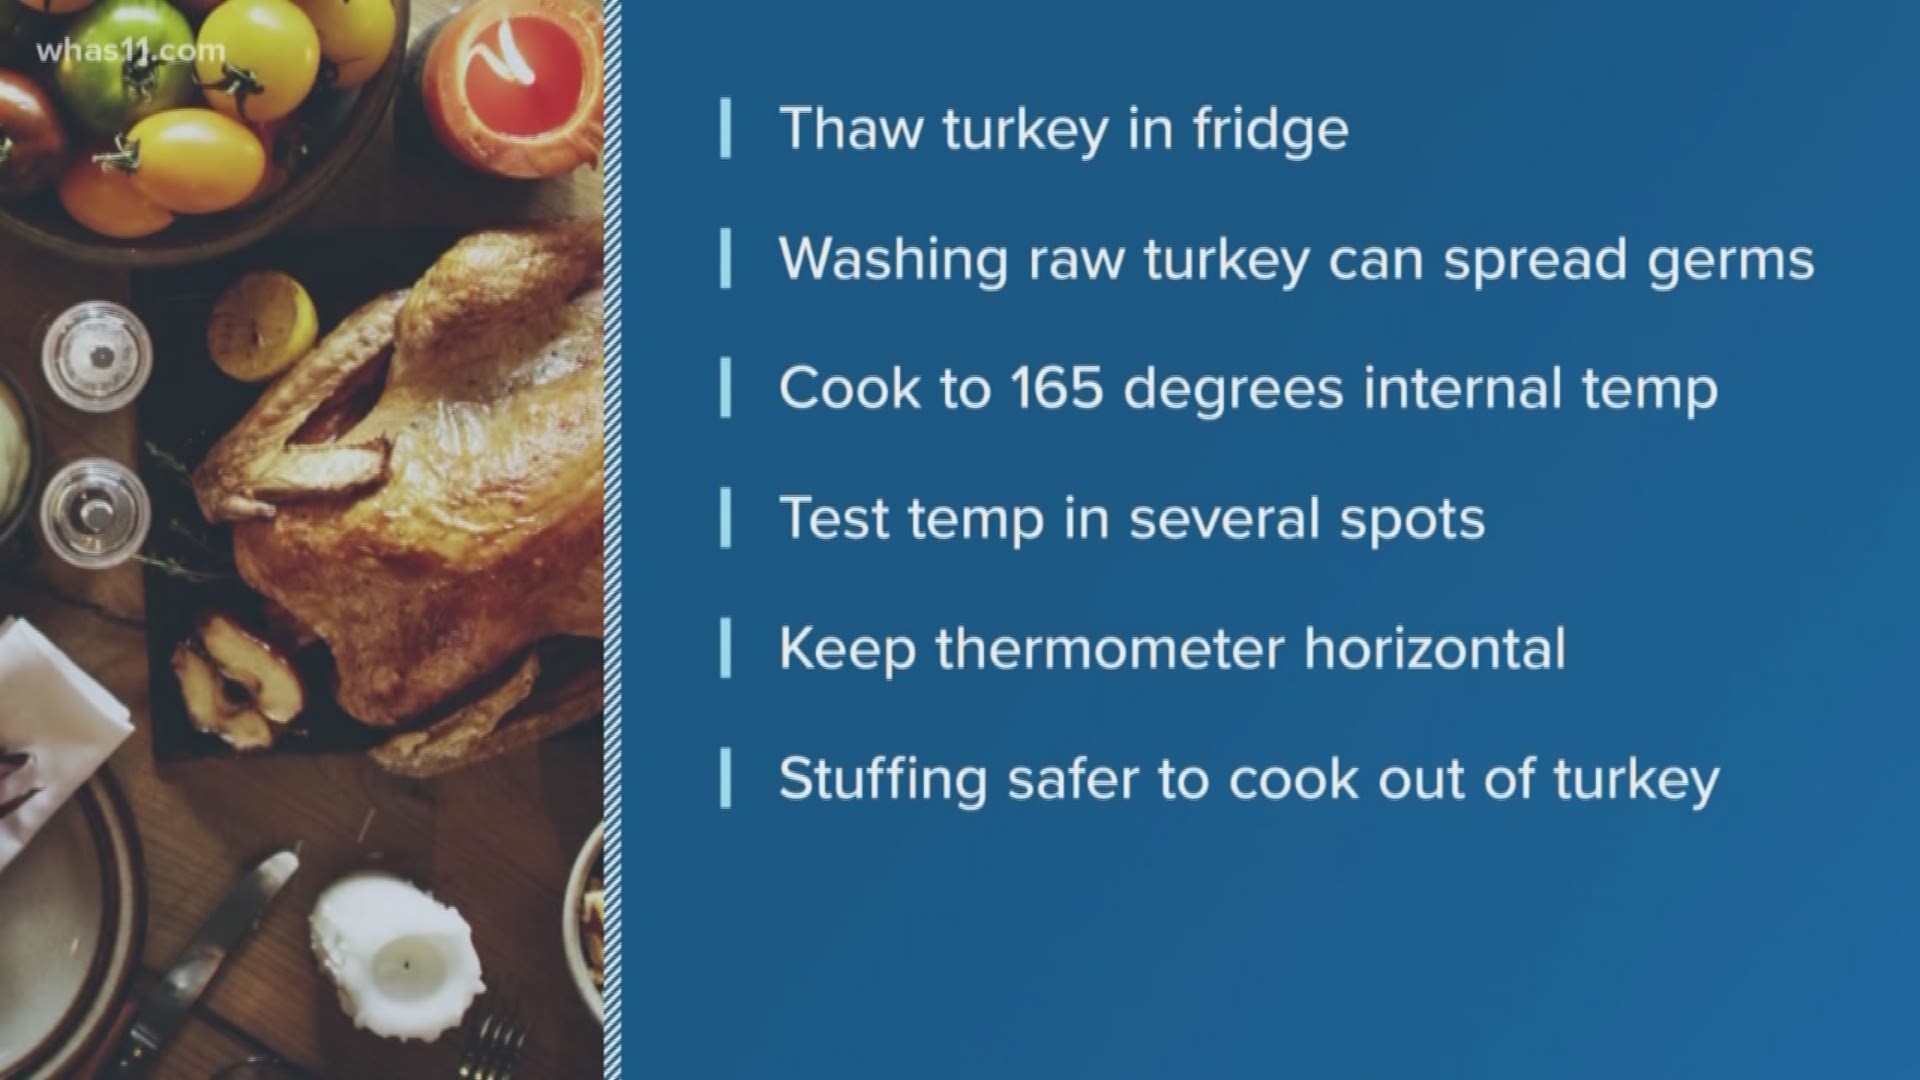 It's the iconic dish of Thanksgiving, but the turkey could make you sick if you're not careful. Here are ways to stay healthy and happy this holiday.